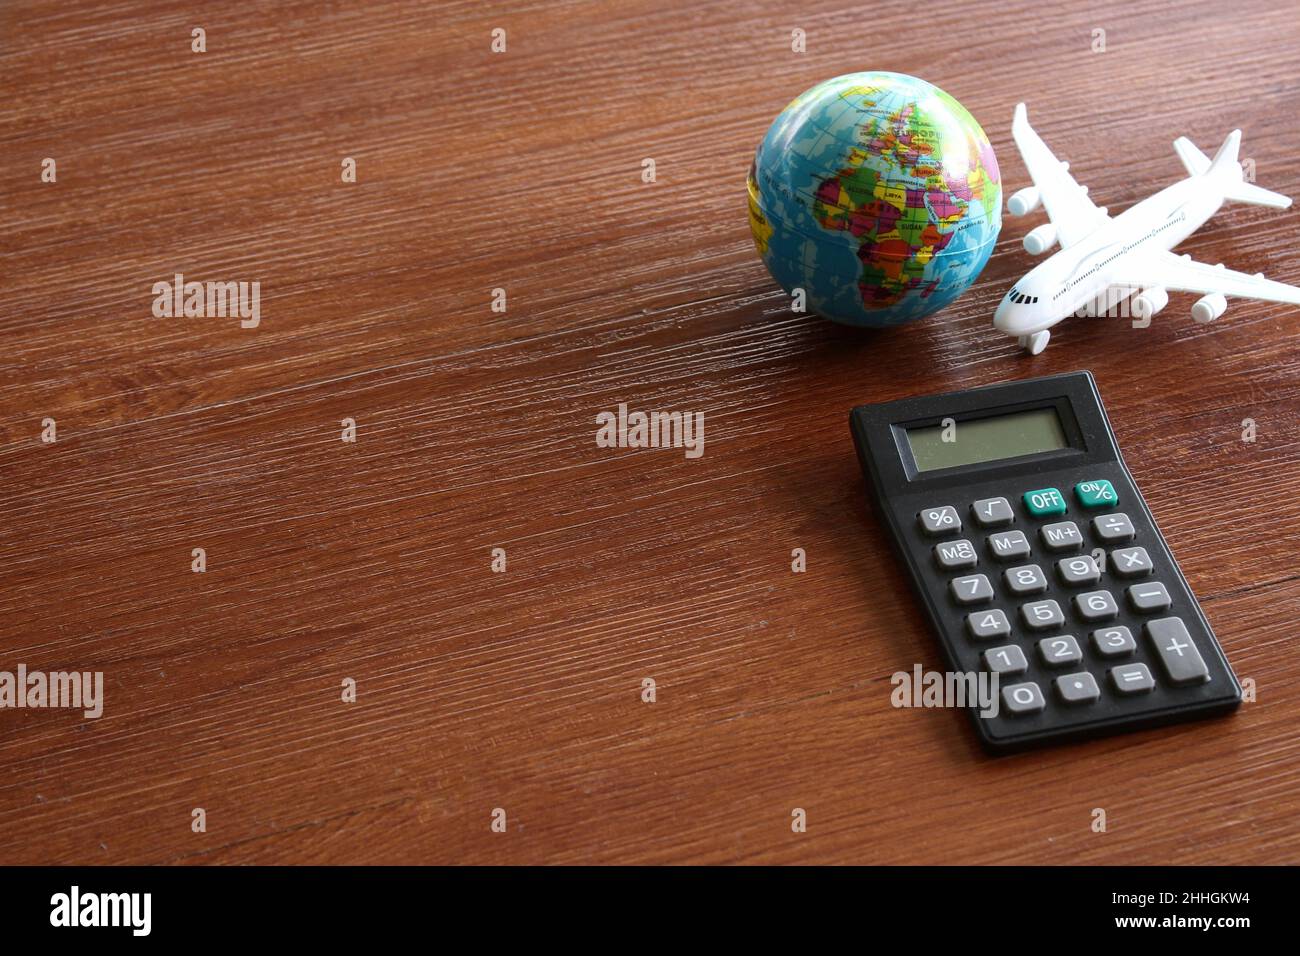 Travel cost calculation concept. Toy plane, earth globe and calculator on wooden table. Stock Photo